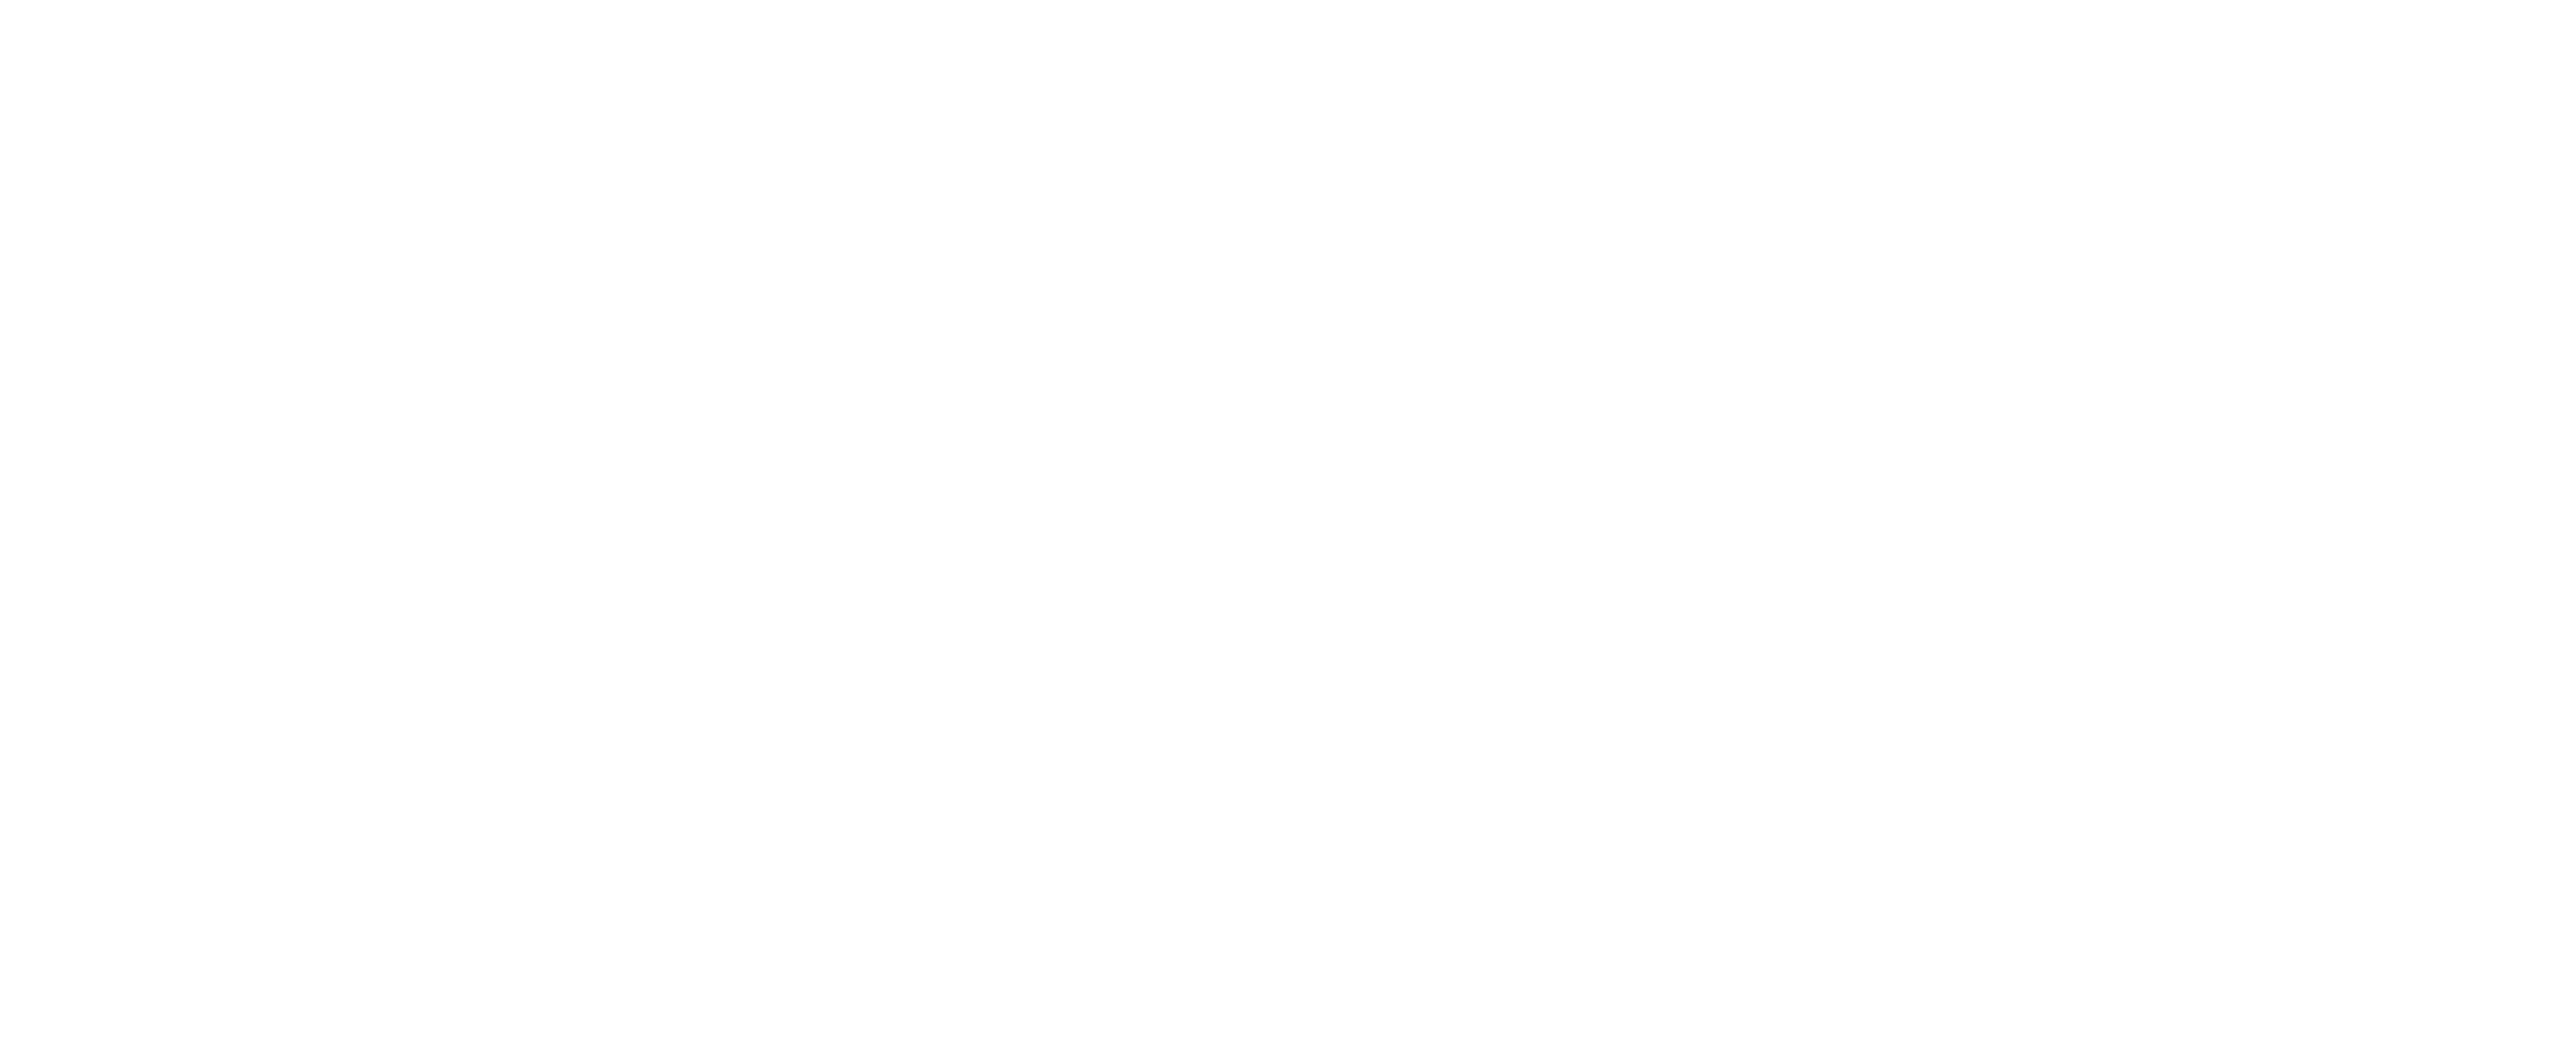 The Podcast Show